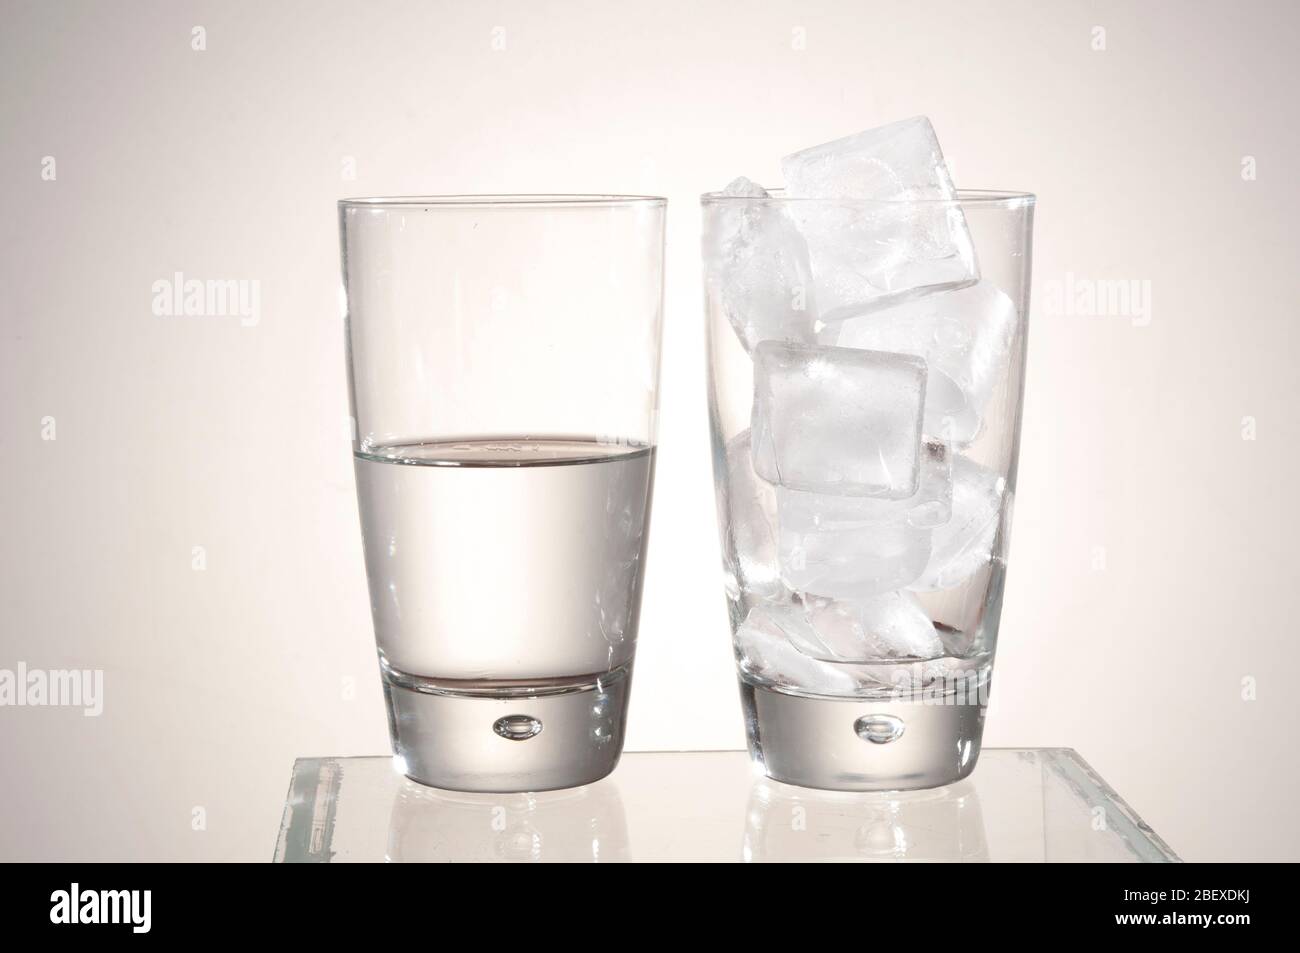 Ice melting concept showing that one glass full of ice melts down to be less water in the other glass. Stock Photo